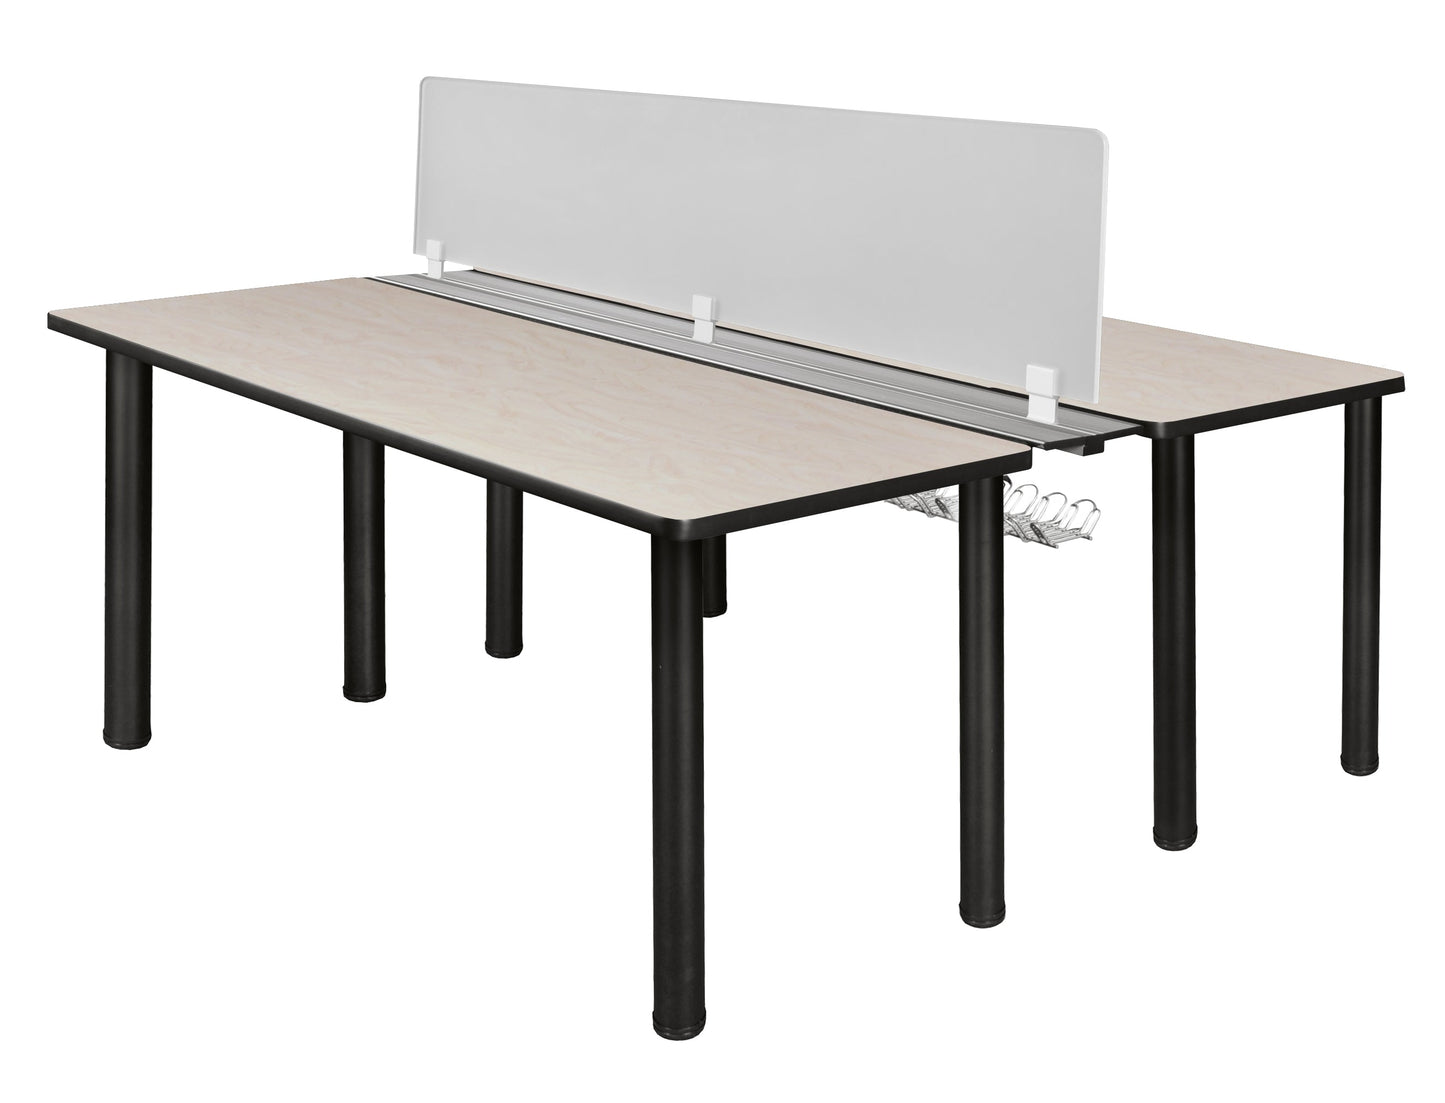 Regency Kee 2 Person Workstation Desk with Privacy Divider (60"W x 58"D)